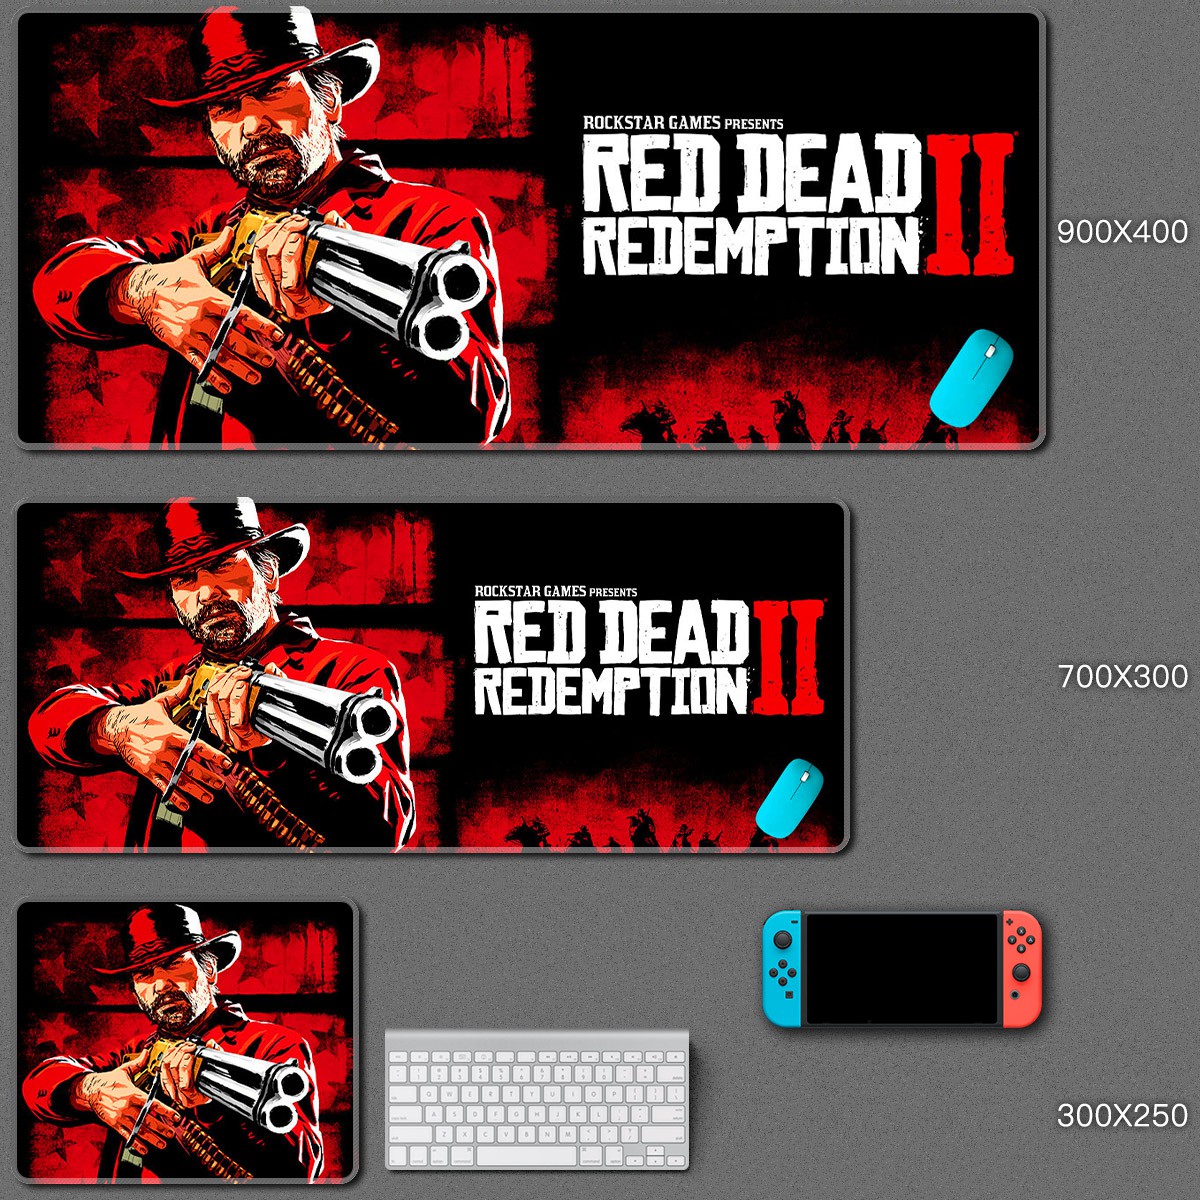 ♥❤❥Mouse Pad Red Dead Redemption Oversized Locking Keyboard Table Mat Van der Linde Help Family Portrait Game Peripheral